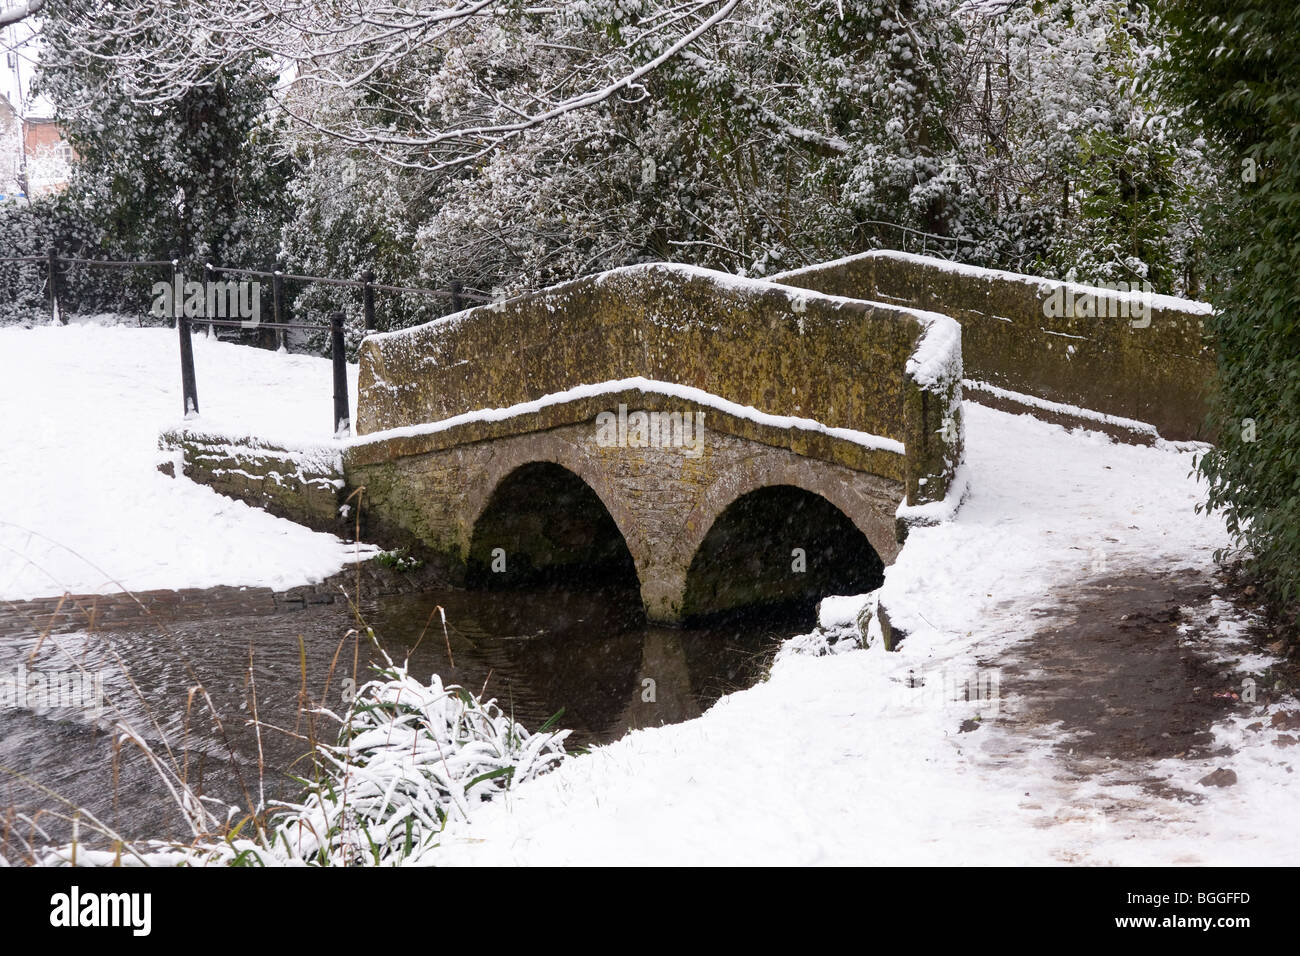 The Pack Horse Bridge and ford at Bide Brook, Lacock in the Winter Snow.Wiltshire England UK Foto Stock